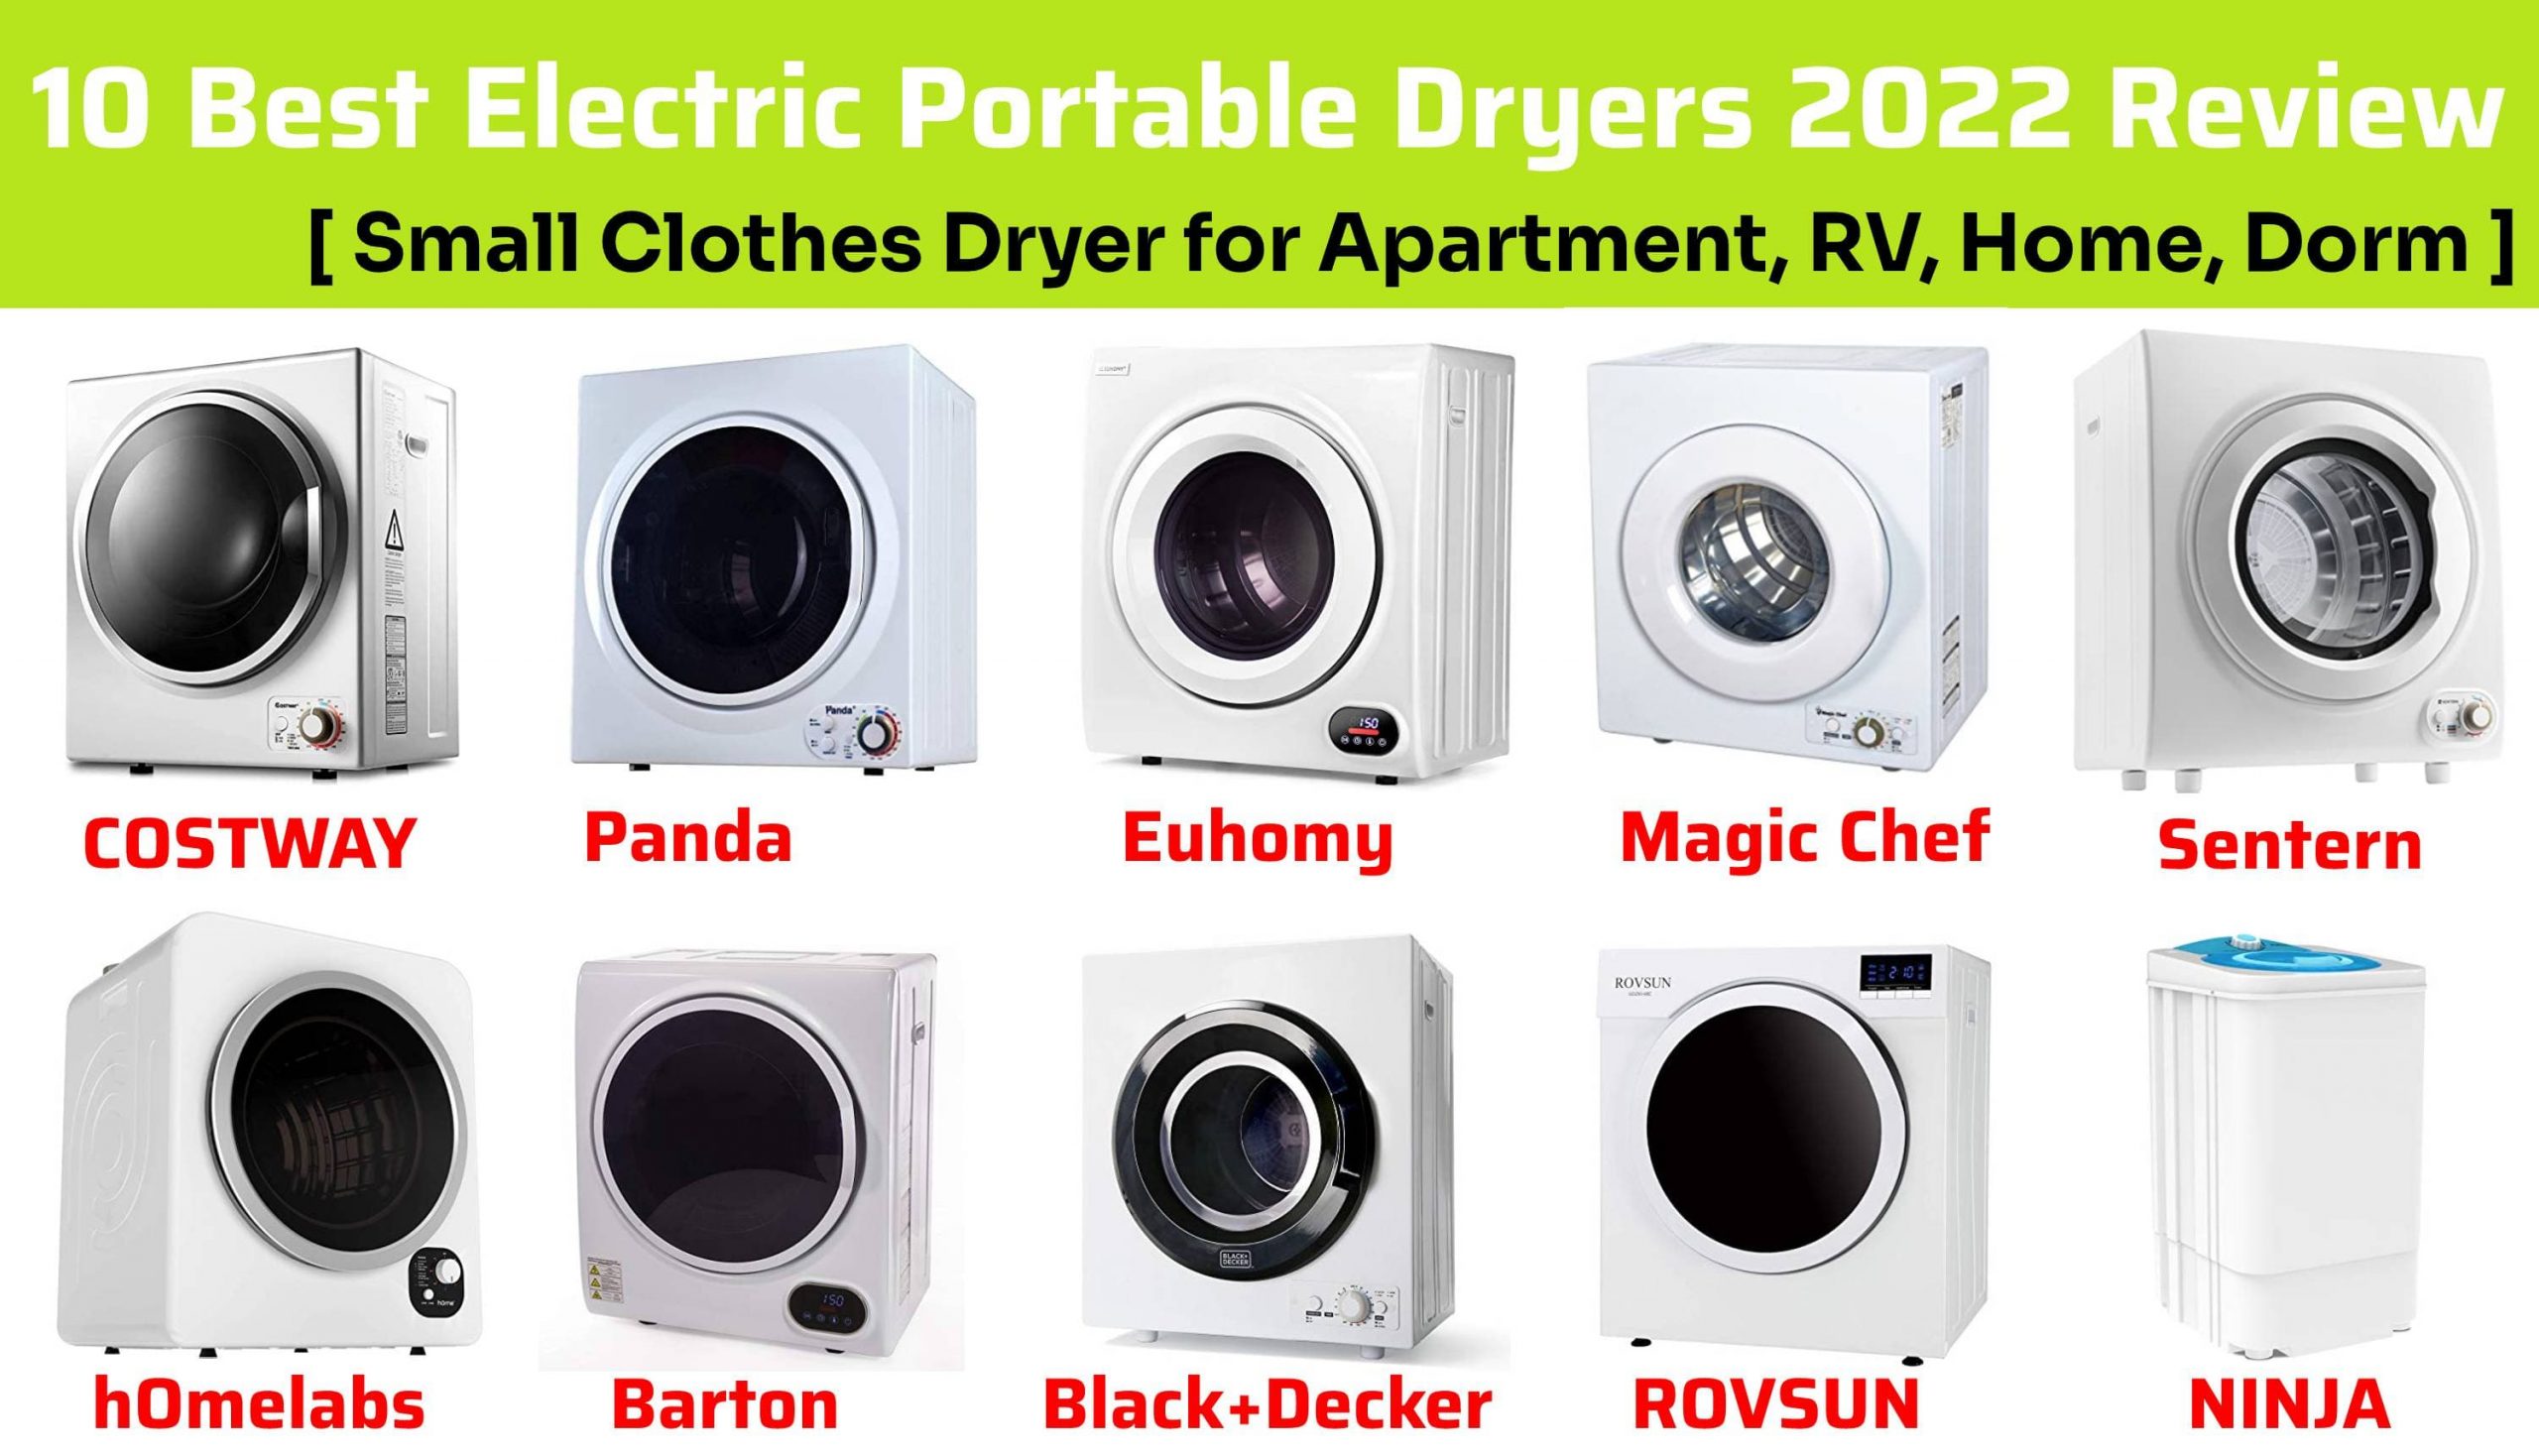 10 Best Electric Portable Dryers 2022 Review - Small Clothes Dryer for Apartment, RV, Home, Dorm ]